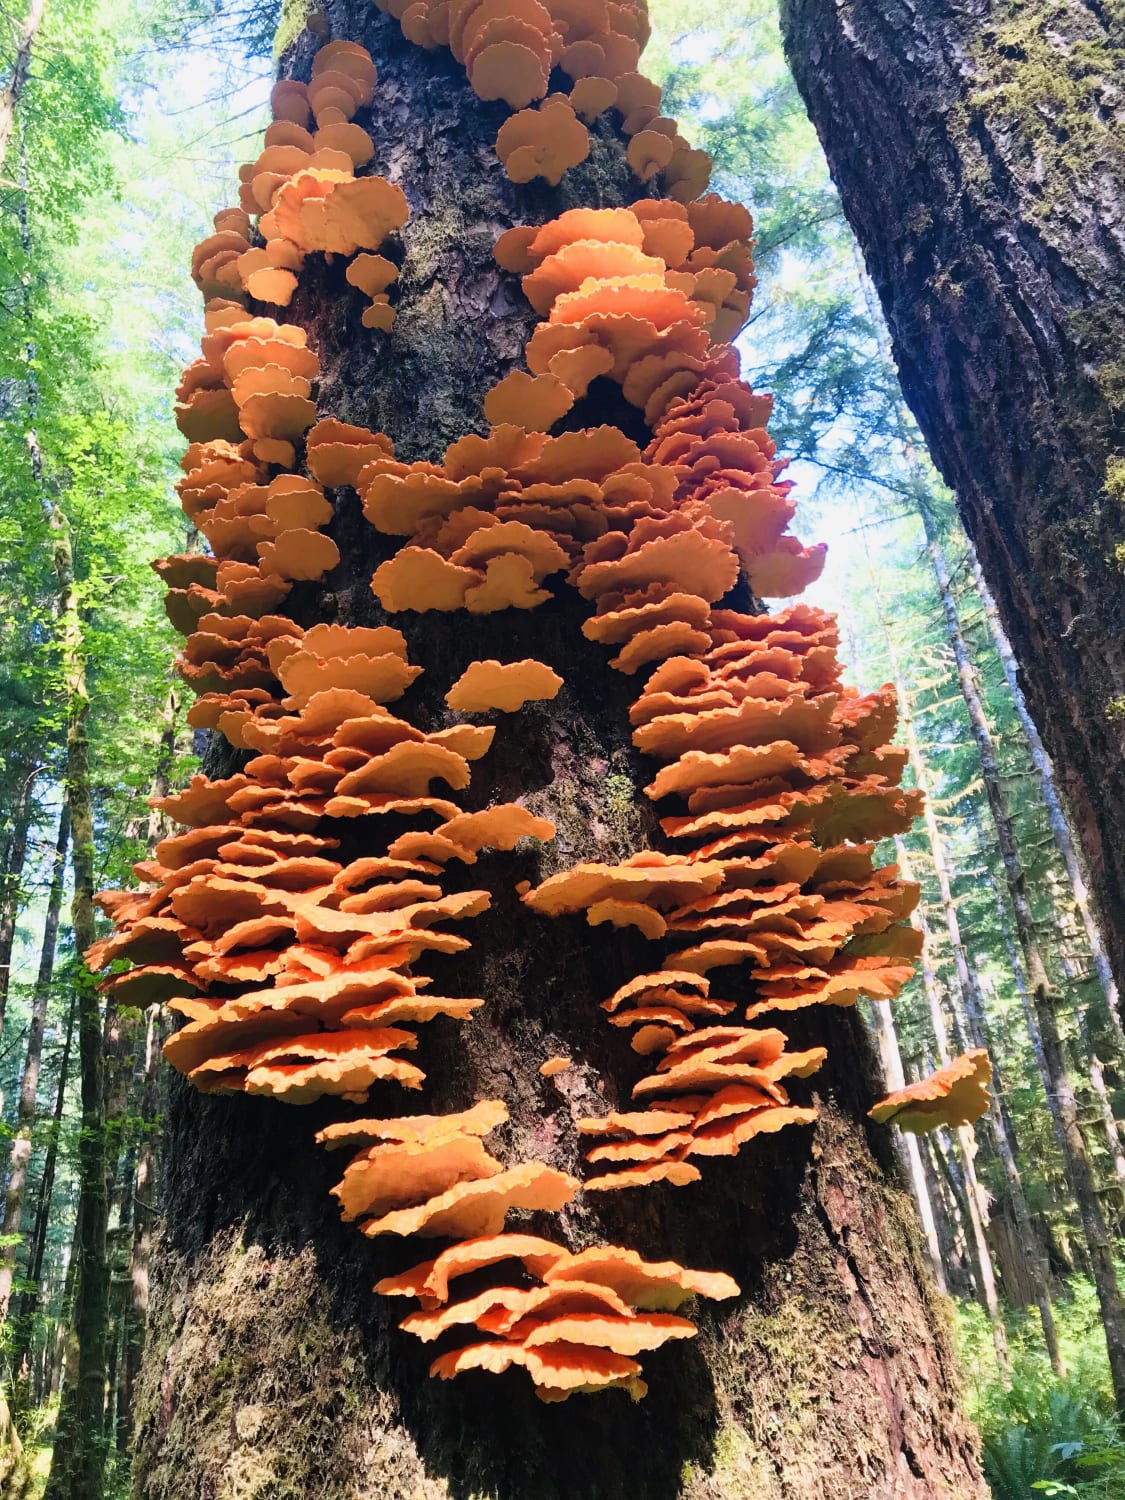 Enough chicken of the woods to make campfire fajitas for the whole family!Olympic Peninsula